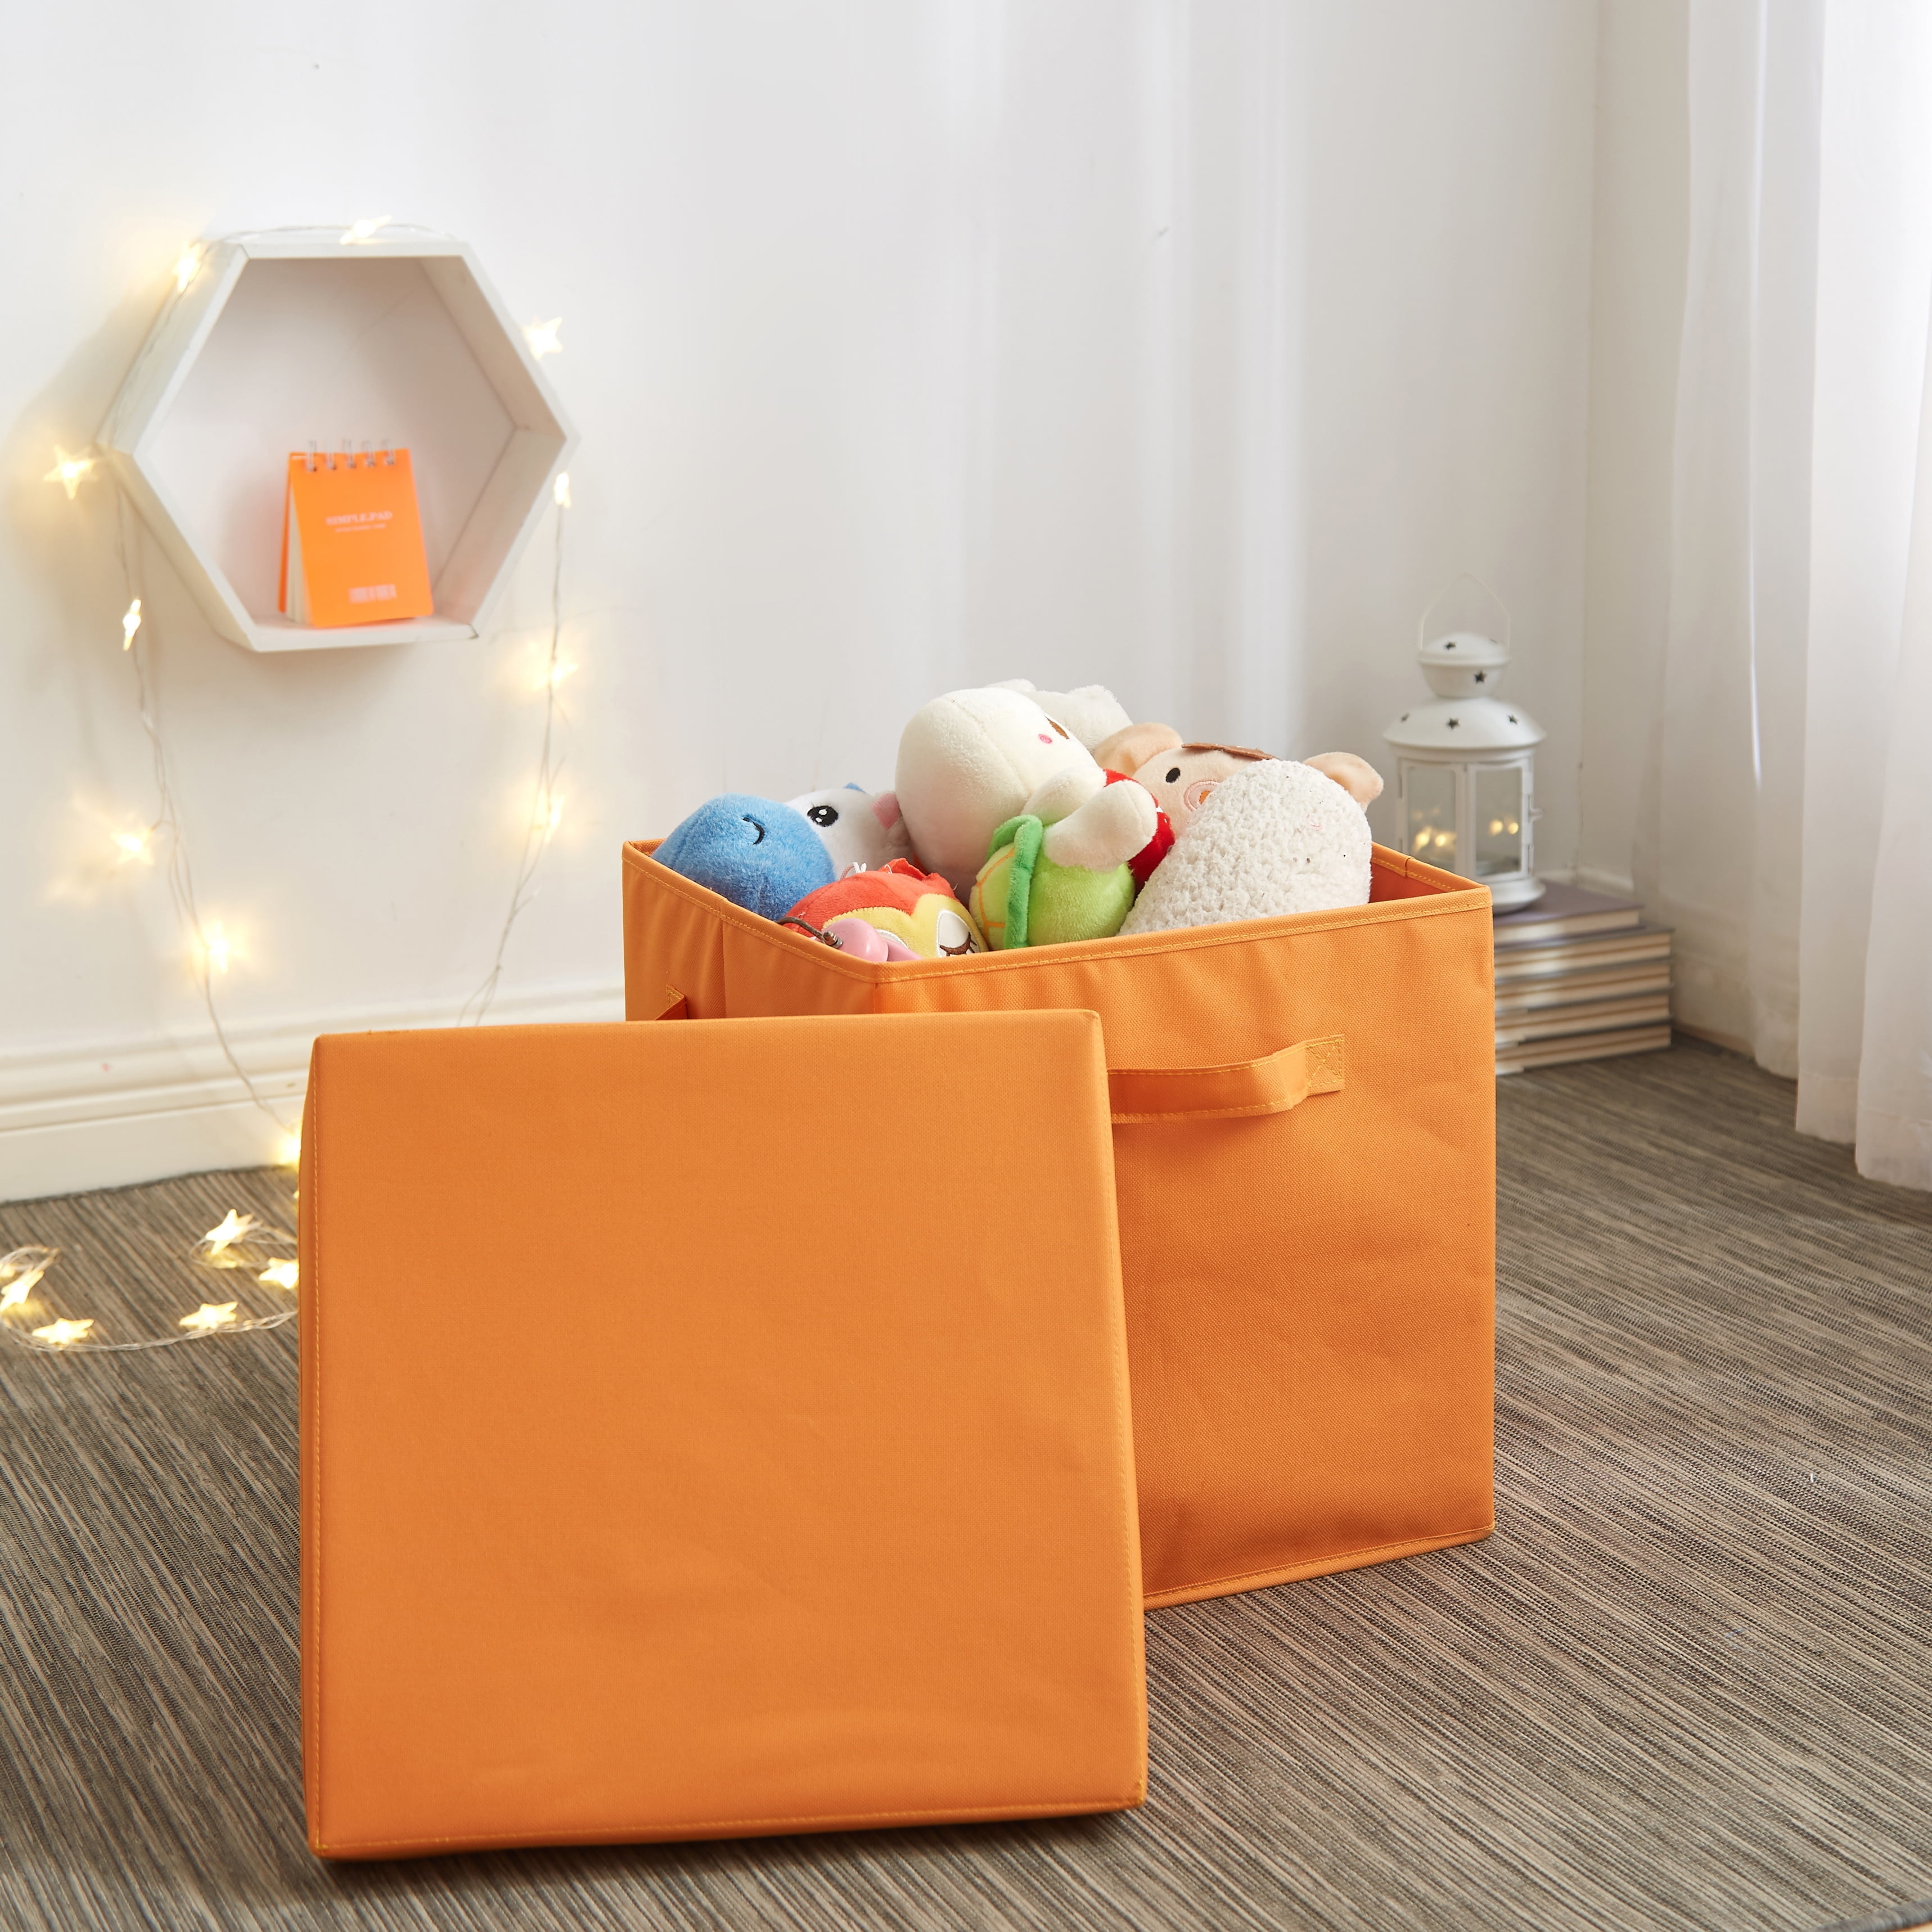 Two orange storage boxes on a floor, one open with stuffed toys inside